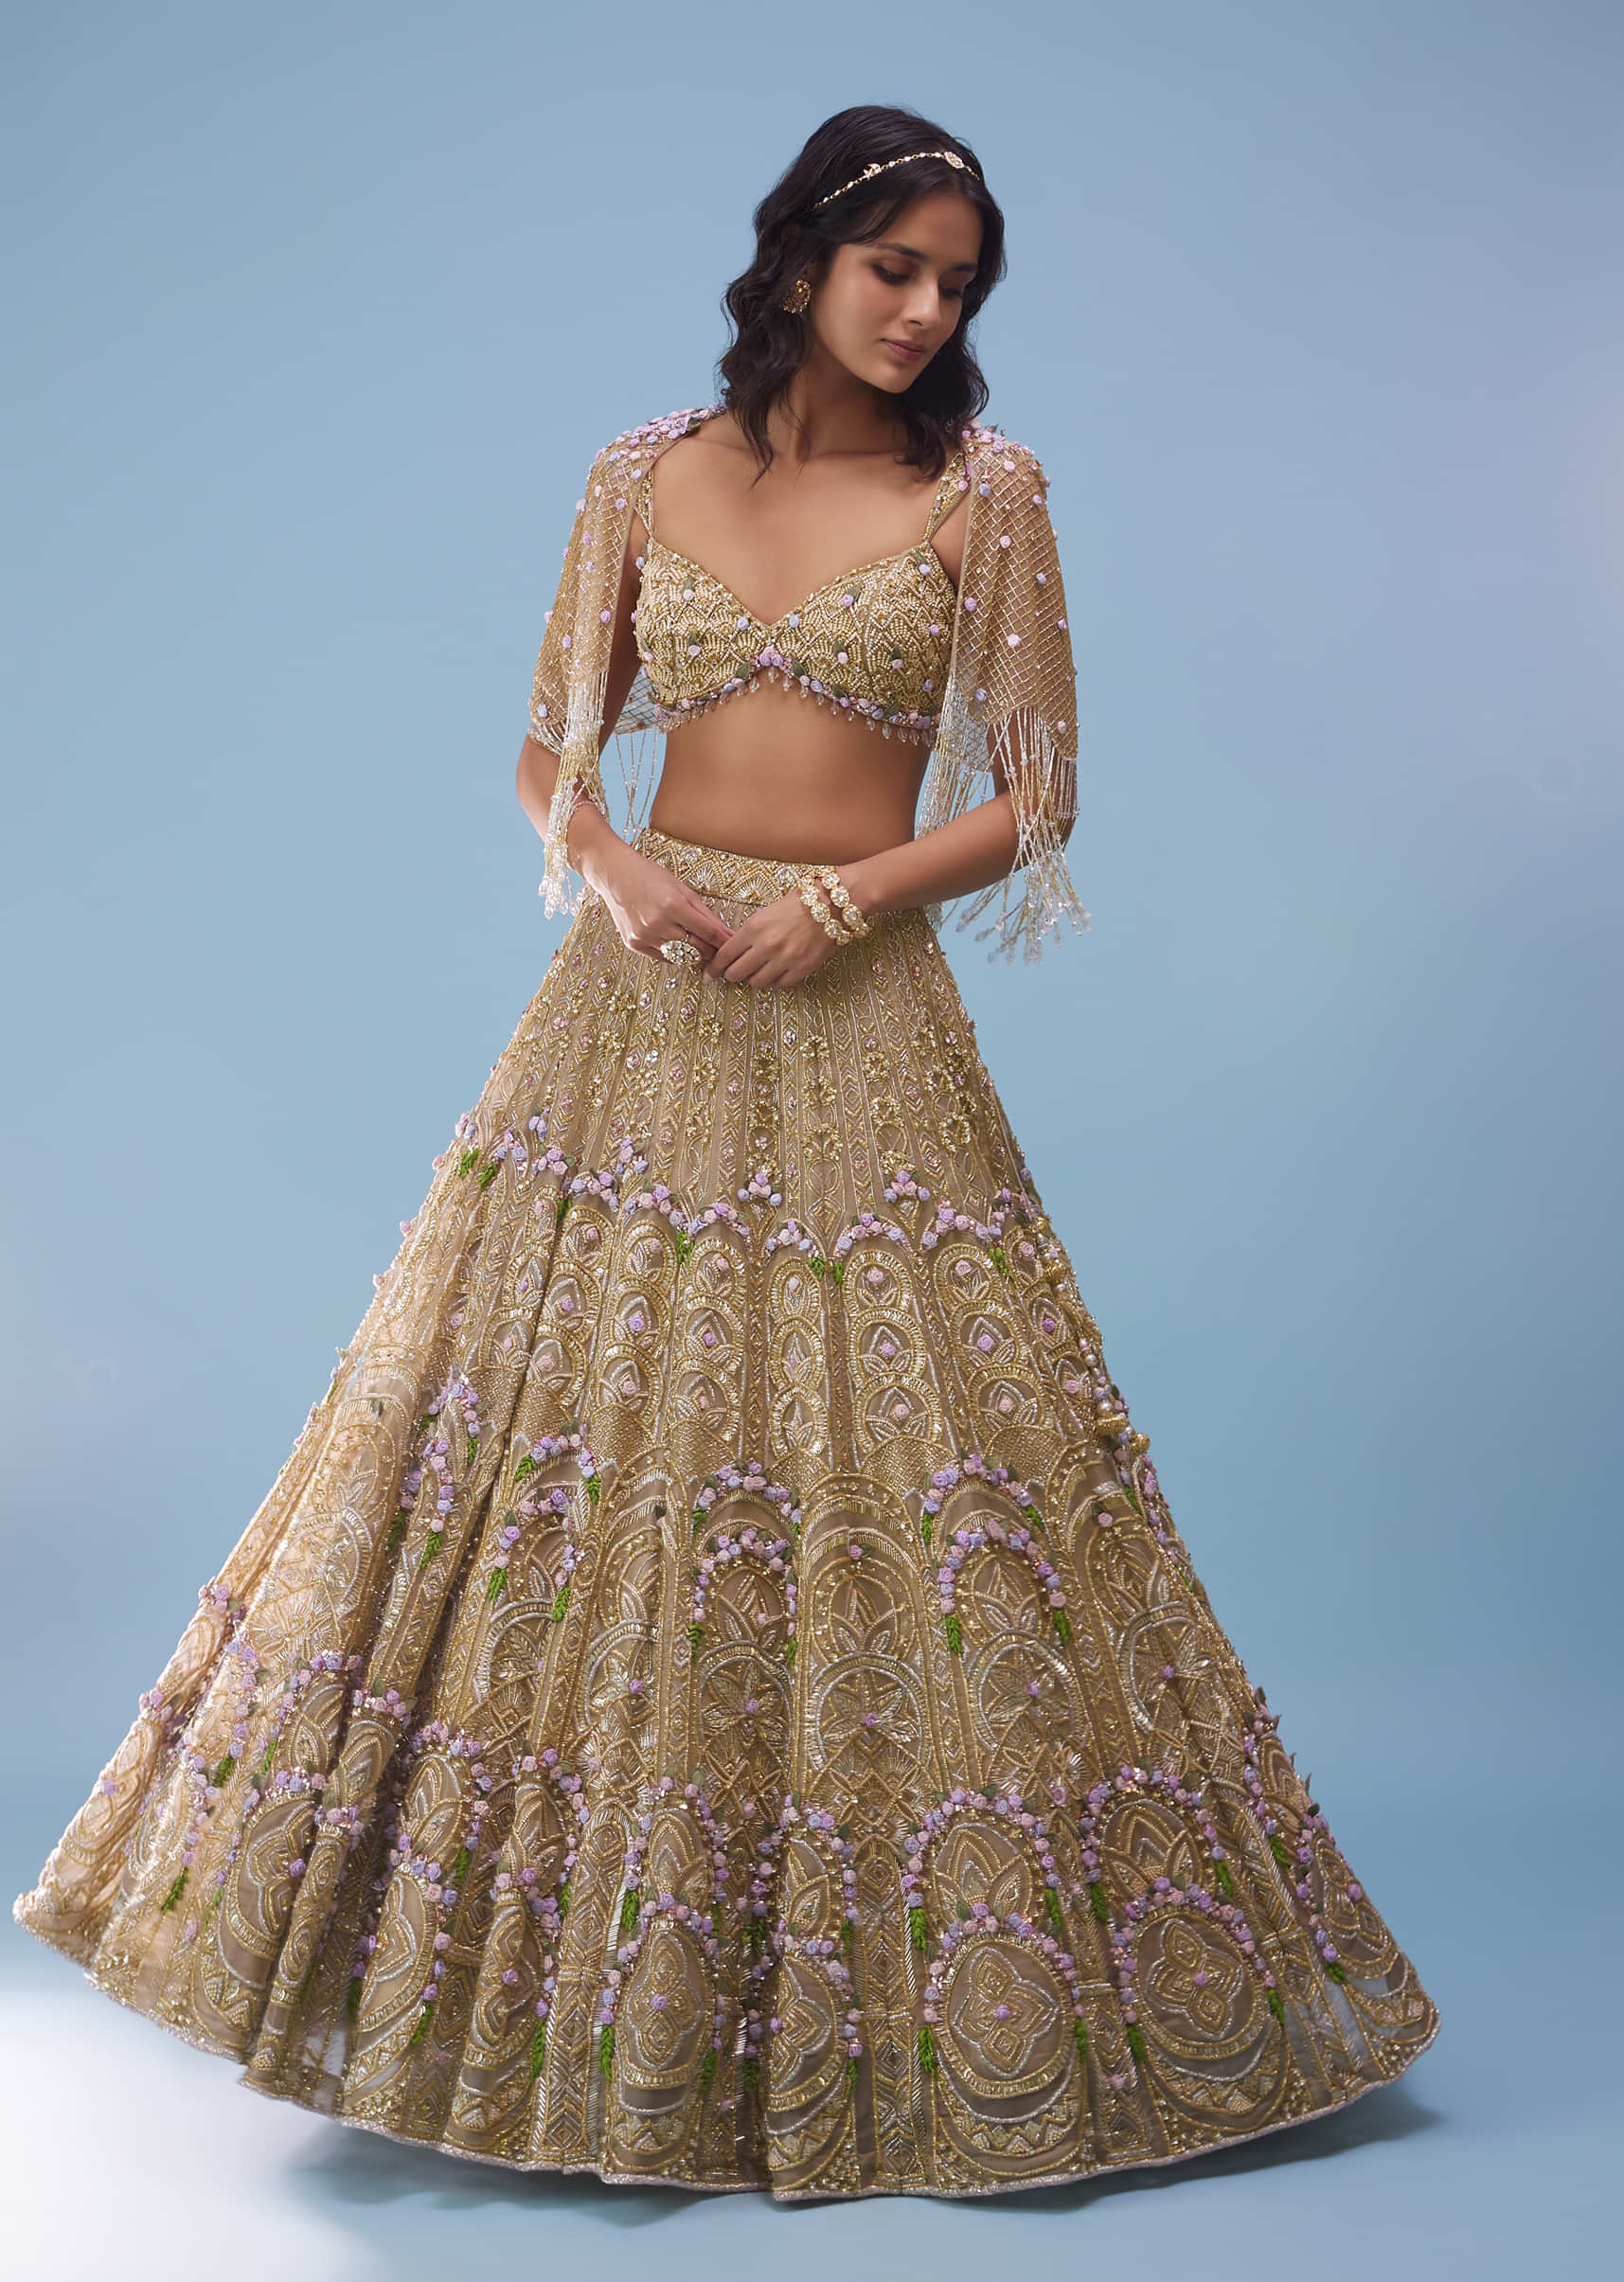 Kalki Bridal Naziaa Beige Lehenga With 3D FLoral Embroidery And An Embroidered Shoulder Rest- NOOR 2022